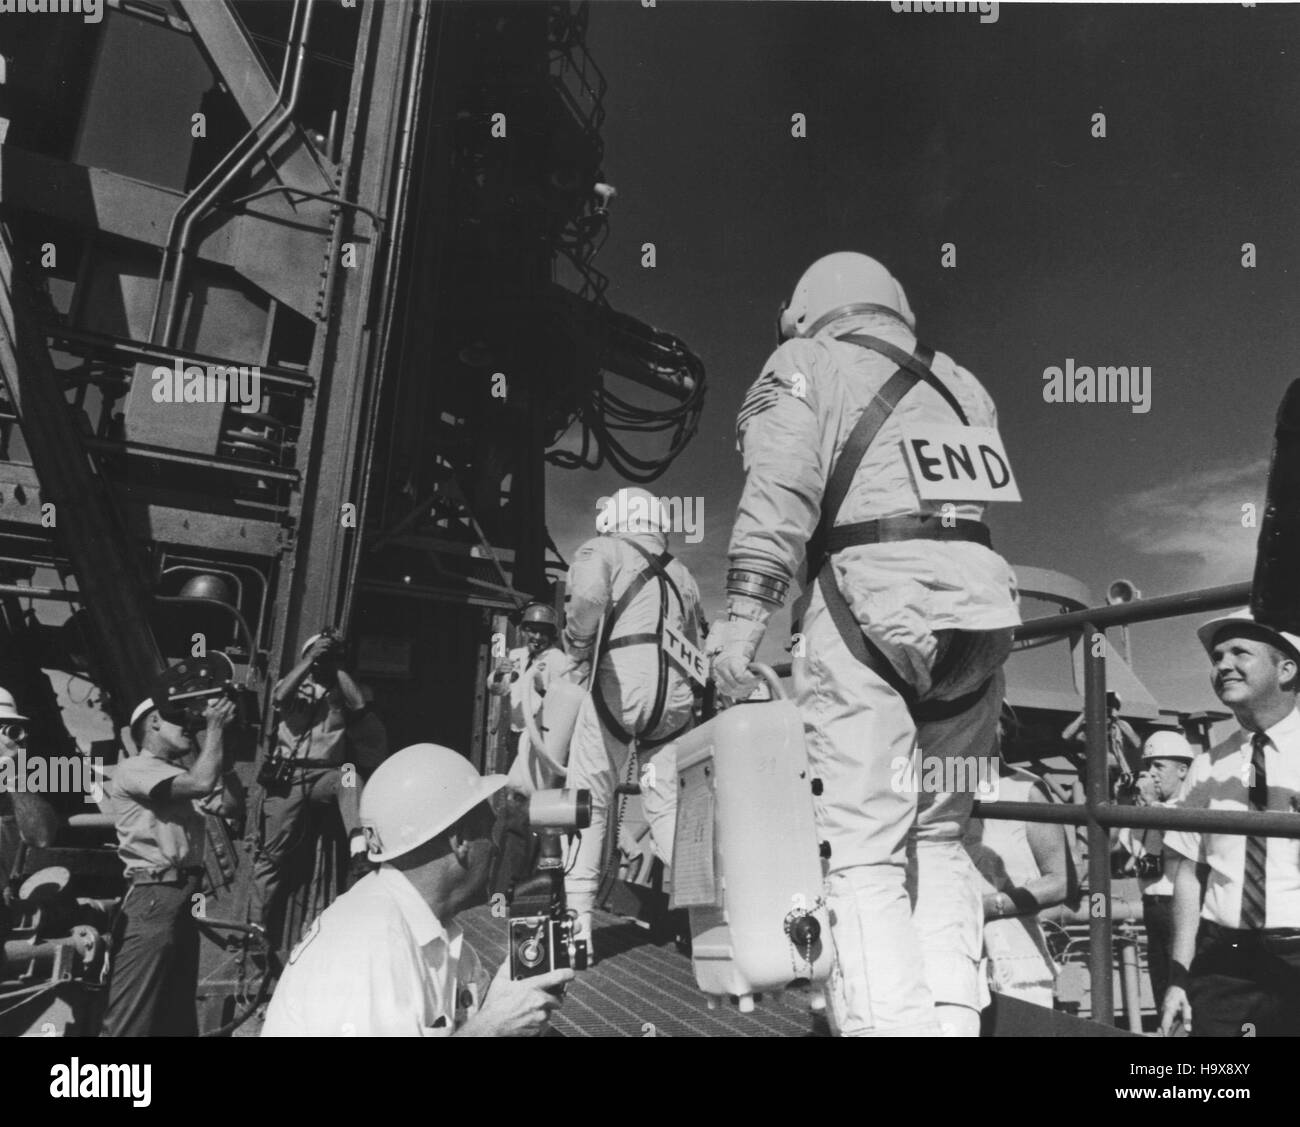 NASA Gemini XII astronauts Jim Lovell and Buzz Aldrin walk to their spacecraft for the last flight of the Gemini Program, wearing signs on their back that say The End at the Kennedy Space Center November 11, 1966 in Merritt Island, Florida. Stock Photo